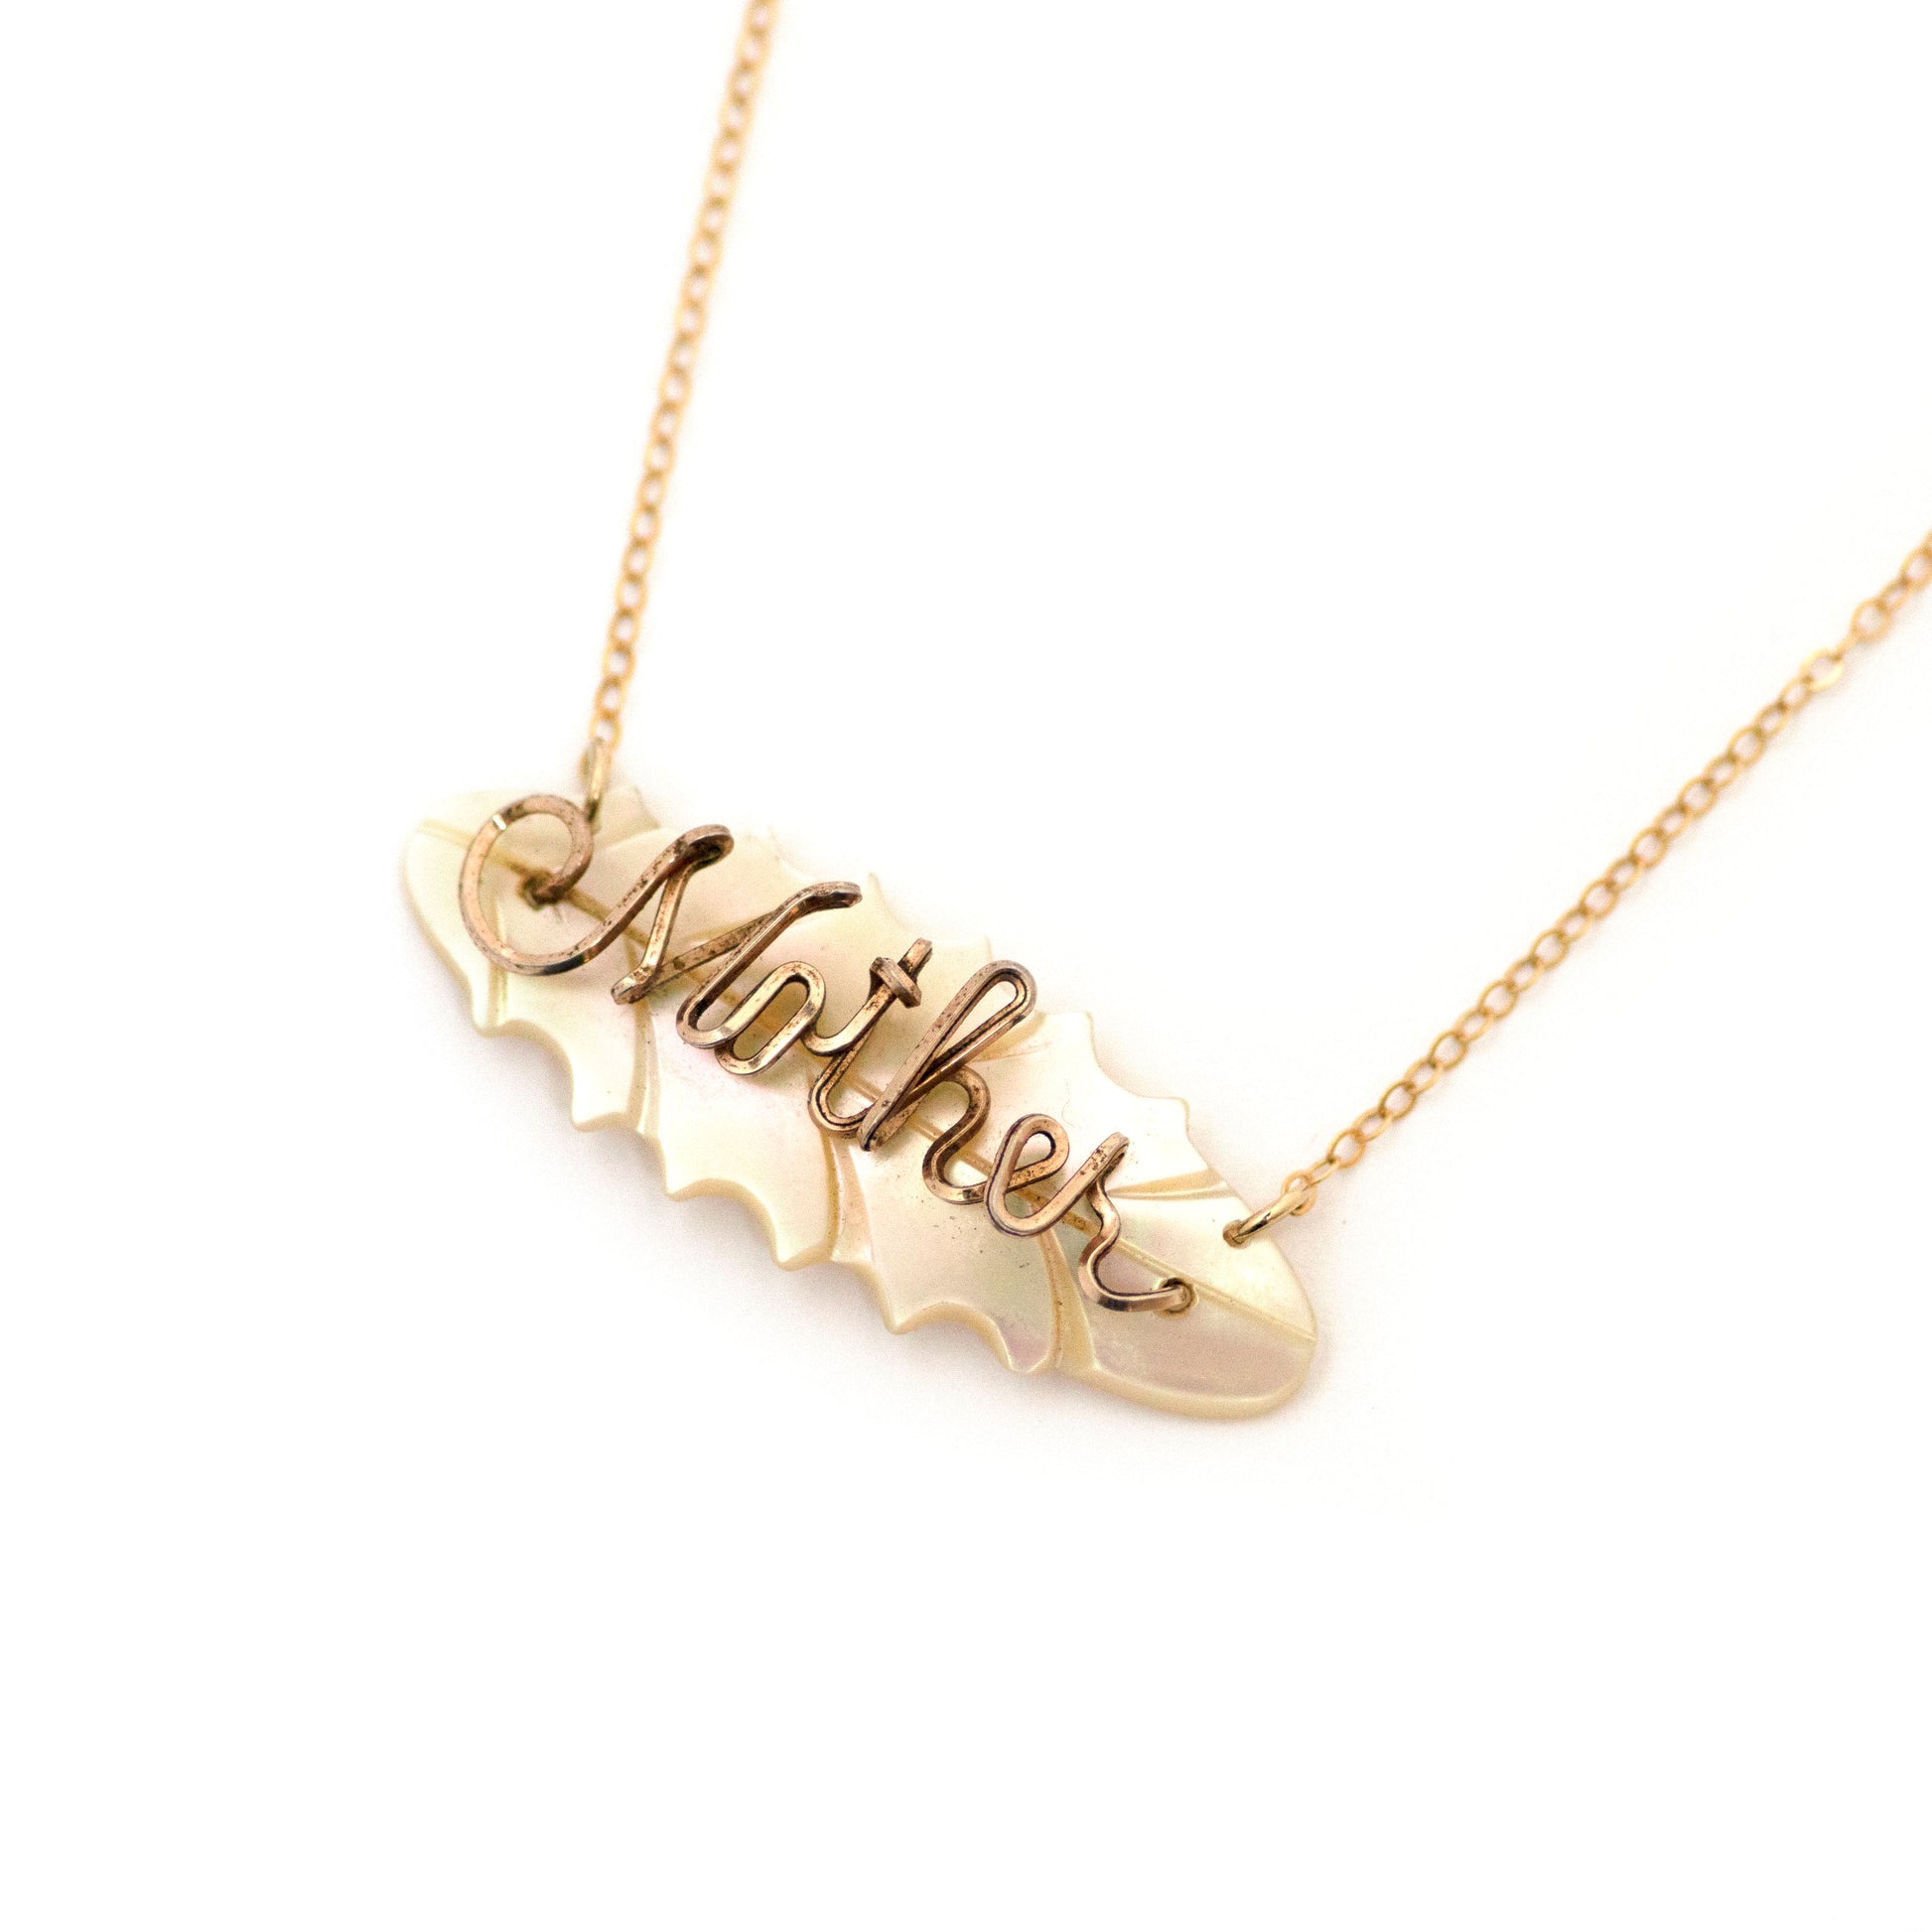 "Mother" gold filled wire script on leaf shaped mother of pearl brooch conversion pendant necklace on gold filled chain. Pendant necklace is on an all white background.